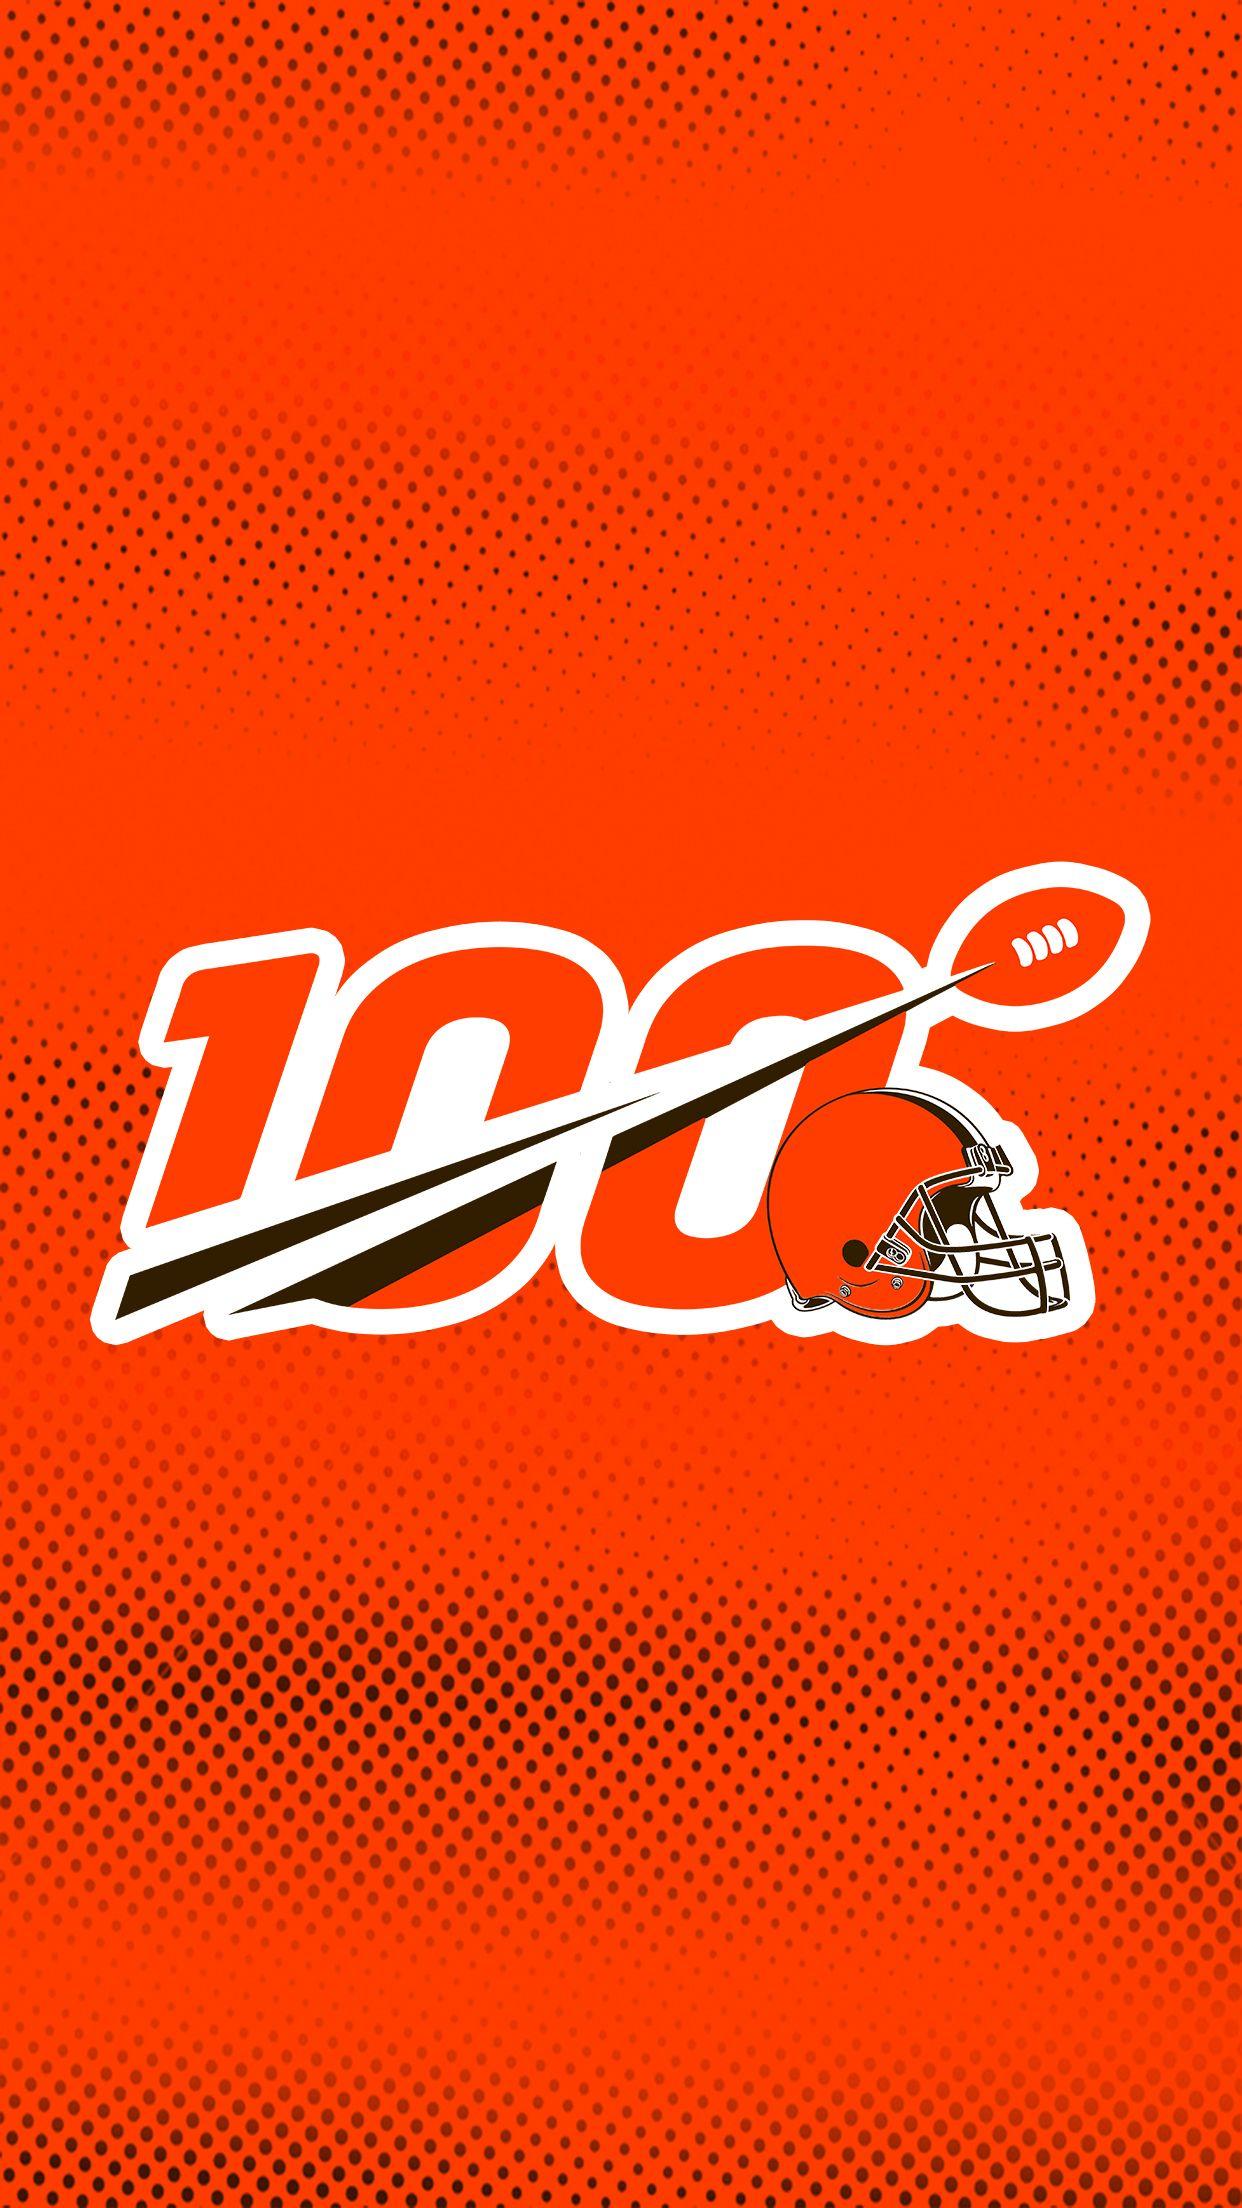 browns. Cleveland browns football